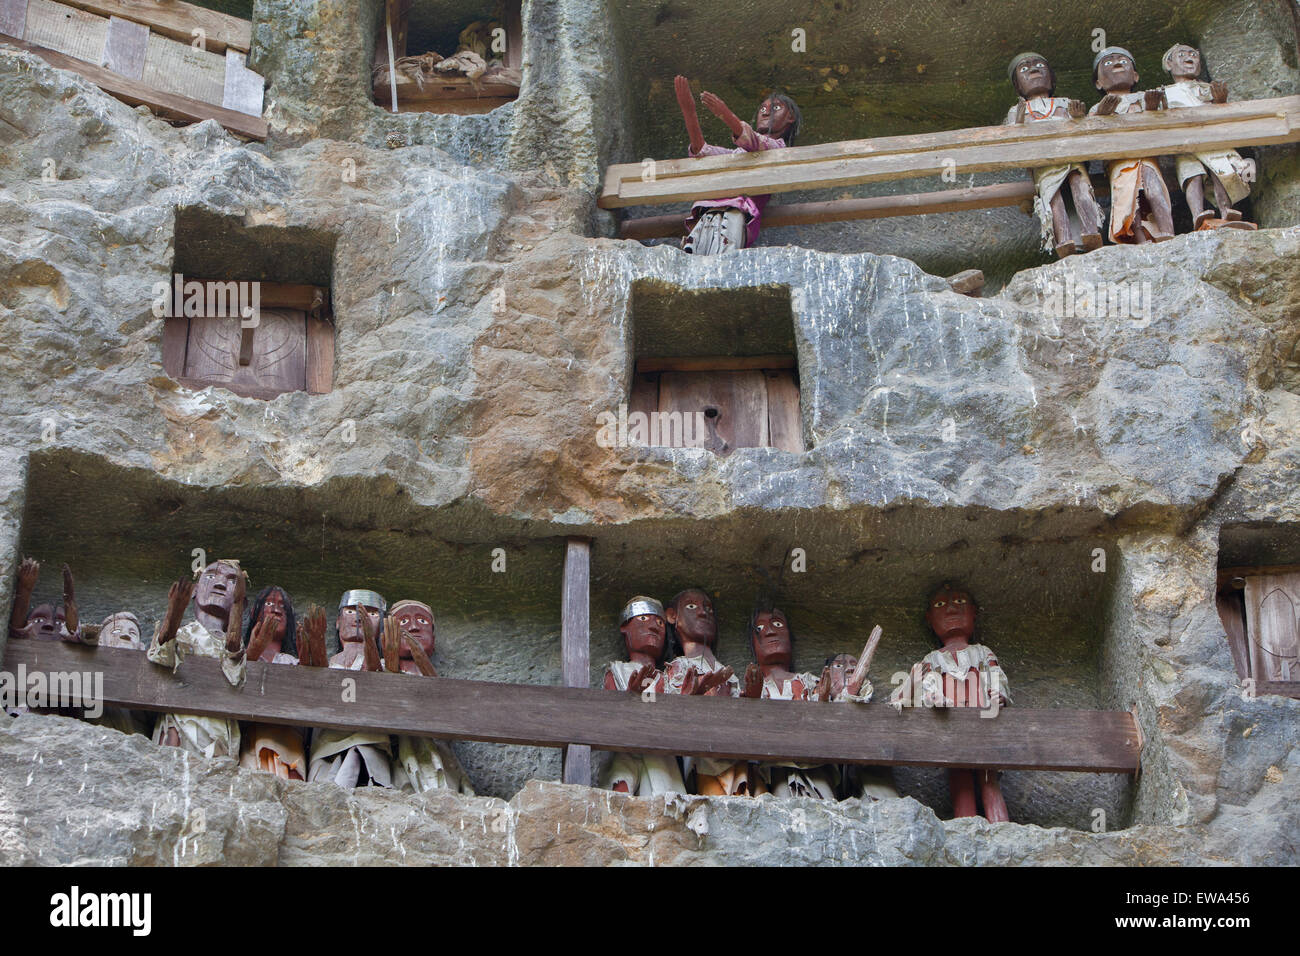 Stone grave openings and wooden effigies on a cliff at a traditional burial site in Lemo, North Toraja, South Sulawesi, Indonesia. Stock Photo